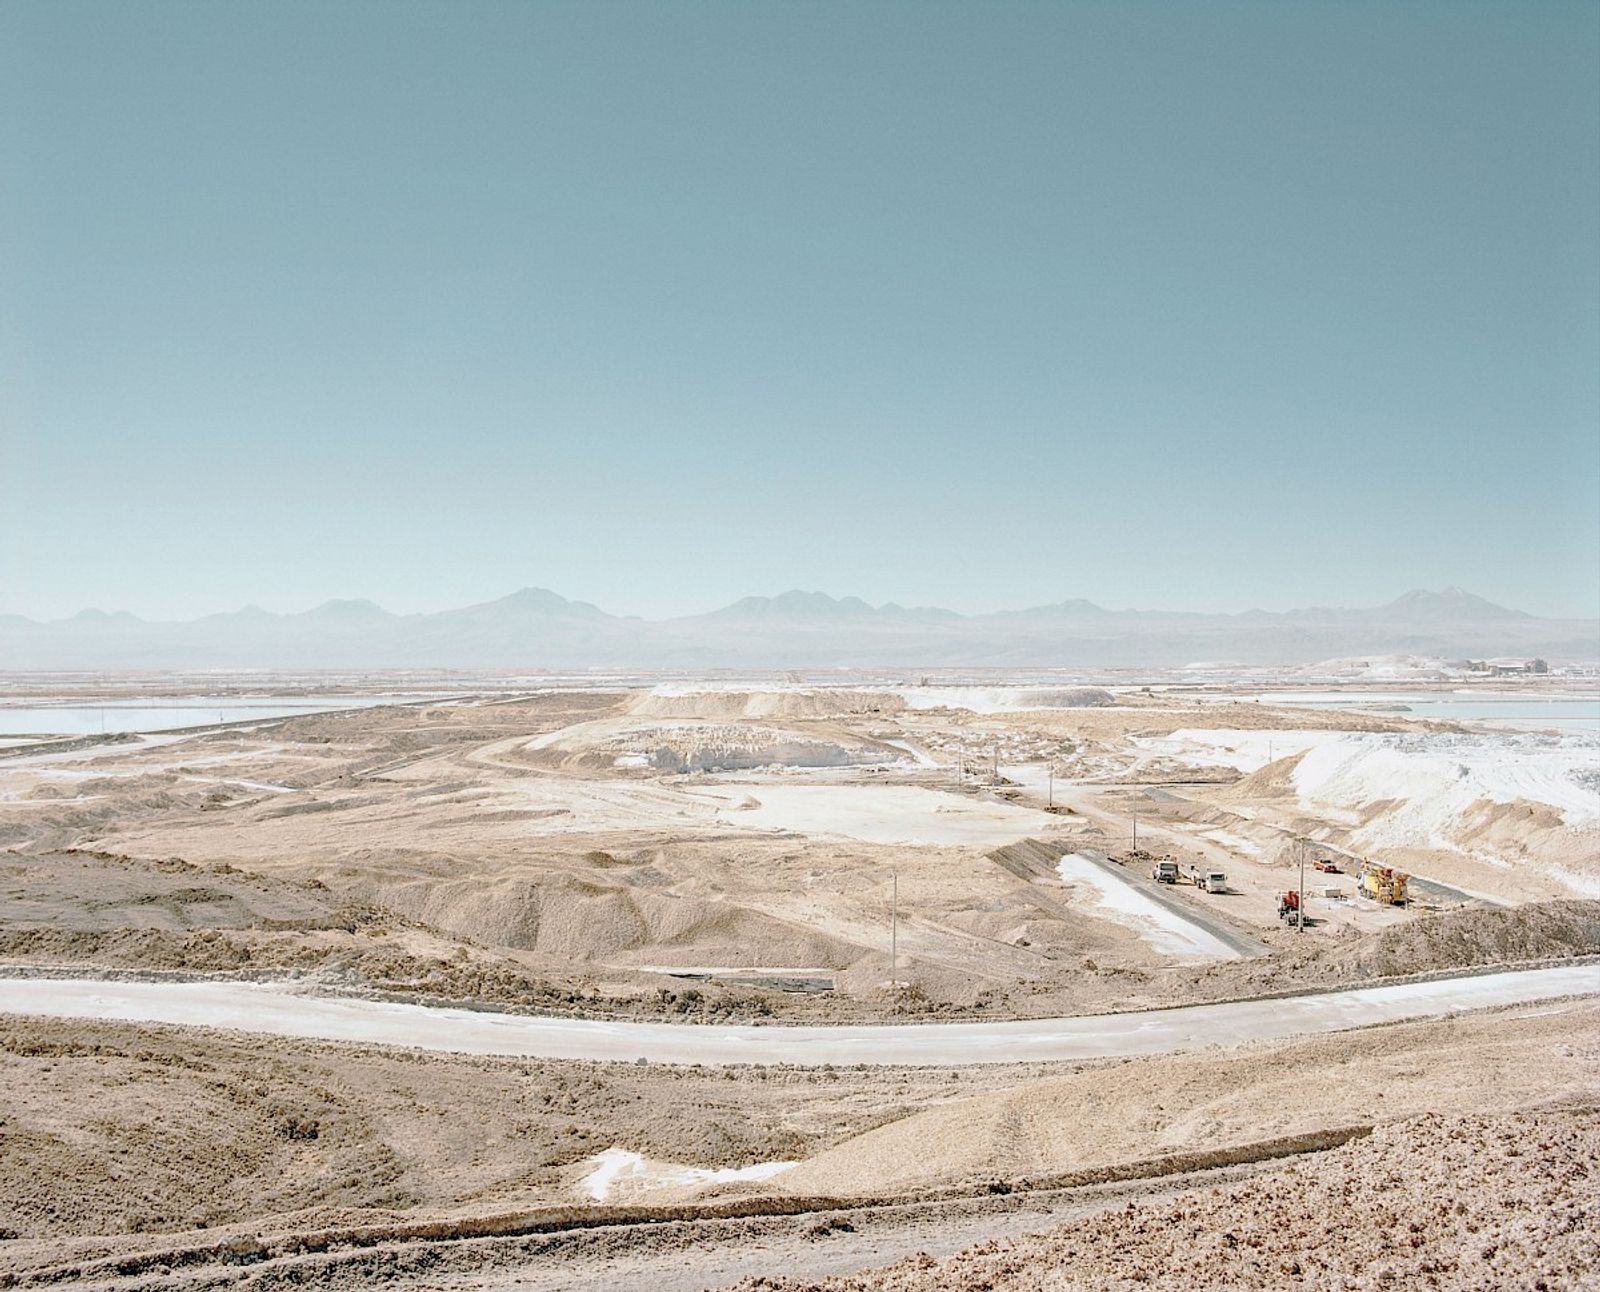 © Catherine Hyland - Image from the Lithium Mining photography project